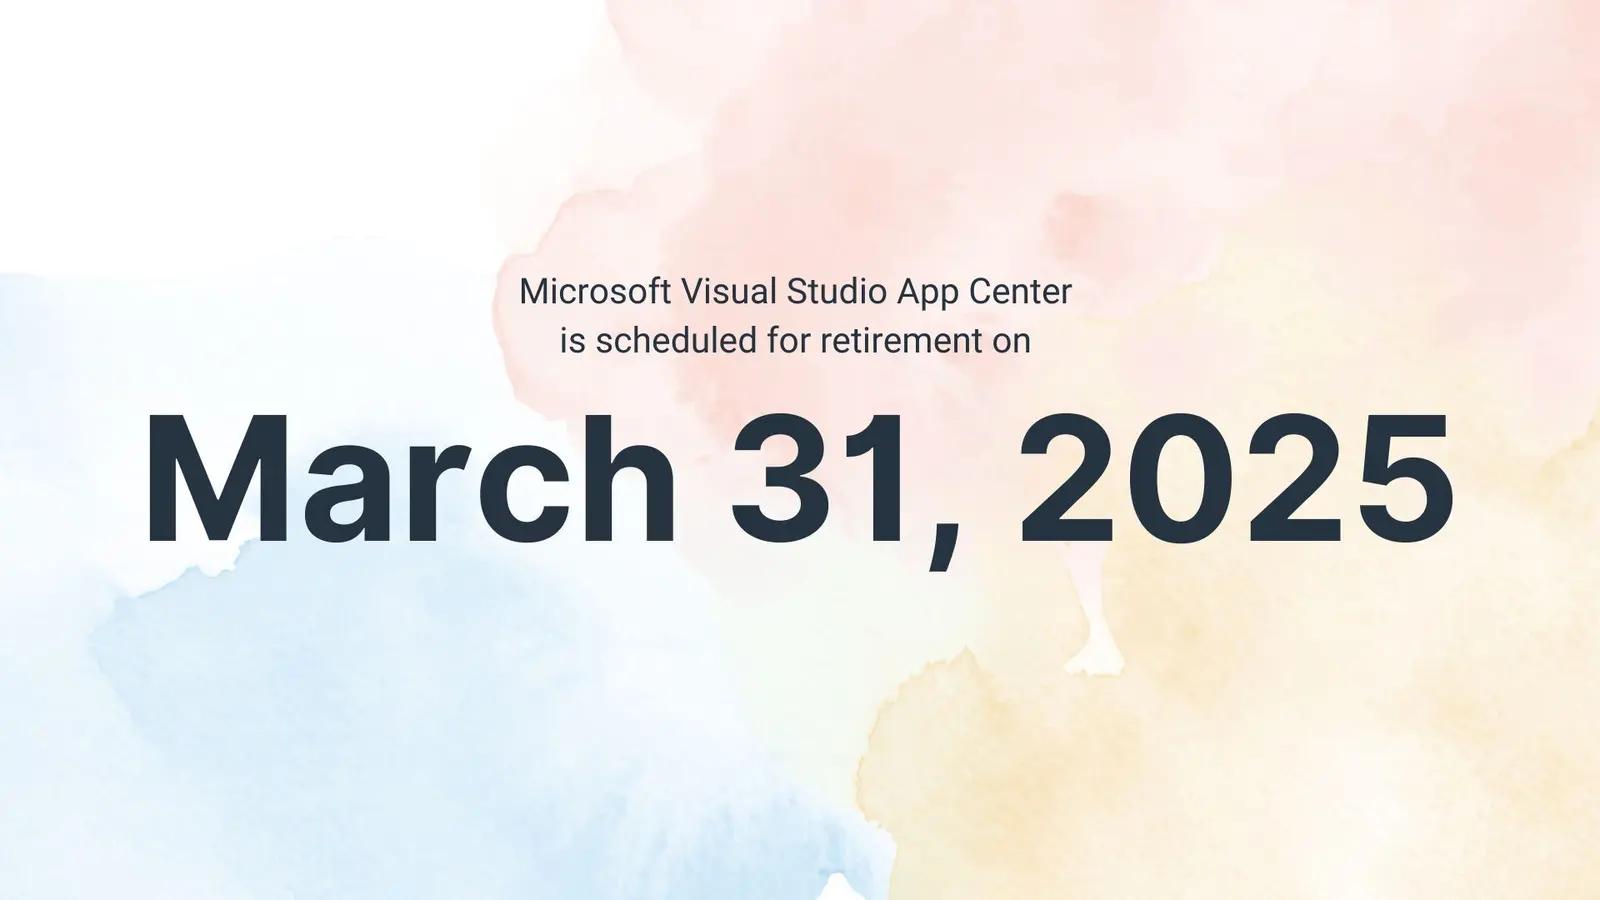 Mircosoft Visual Studio App Center is scheduled for retirement on March 31, 2025